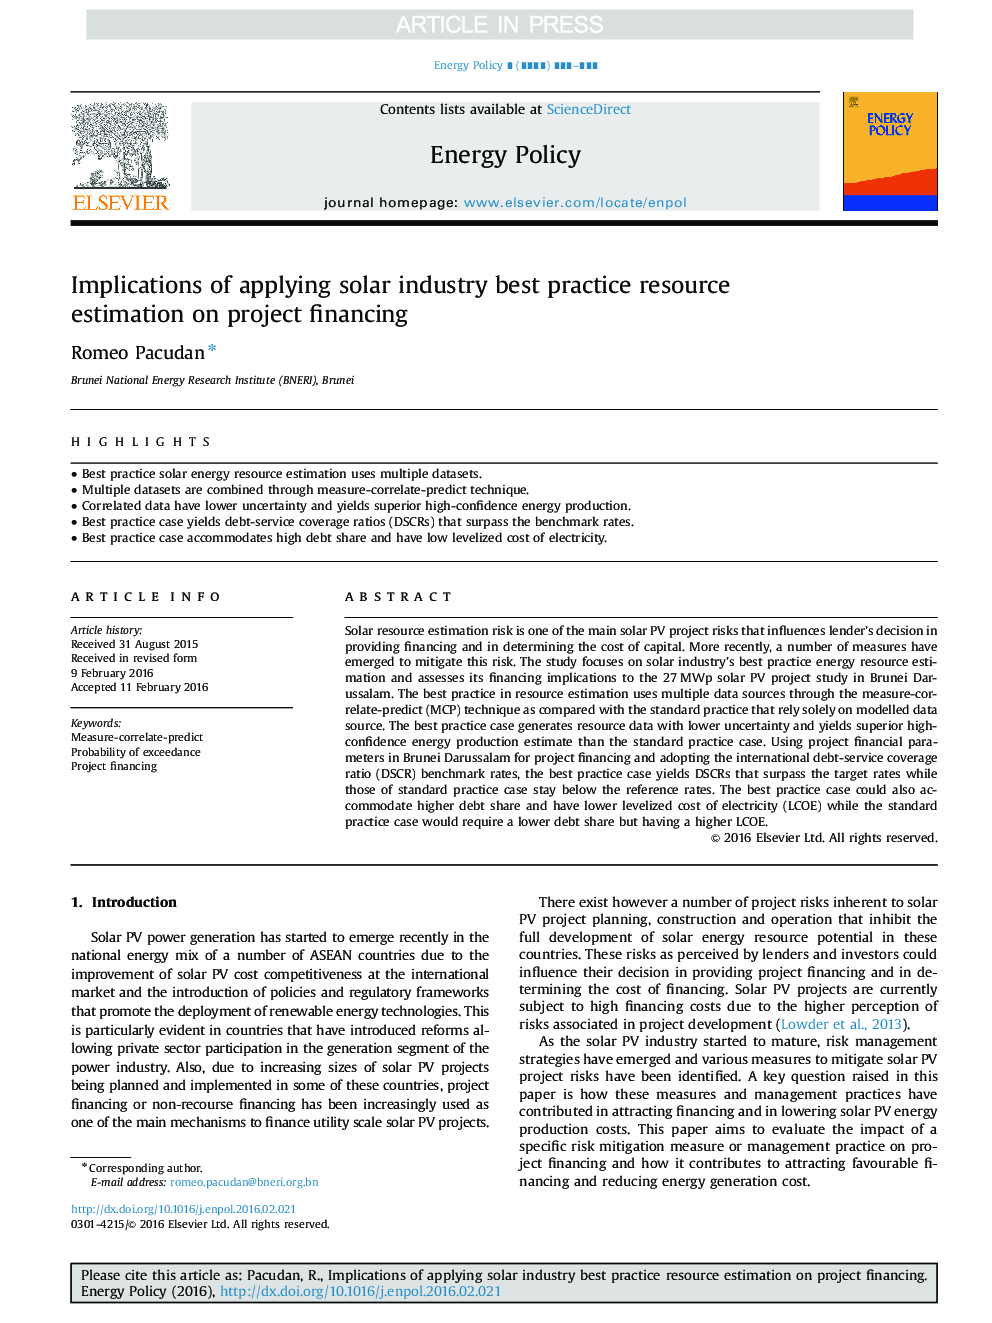 Implications of applying solar industry best practice resource estimation on project financing